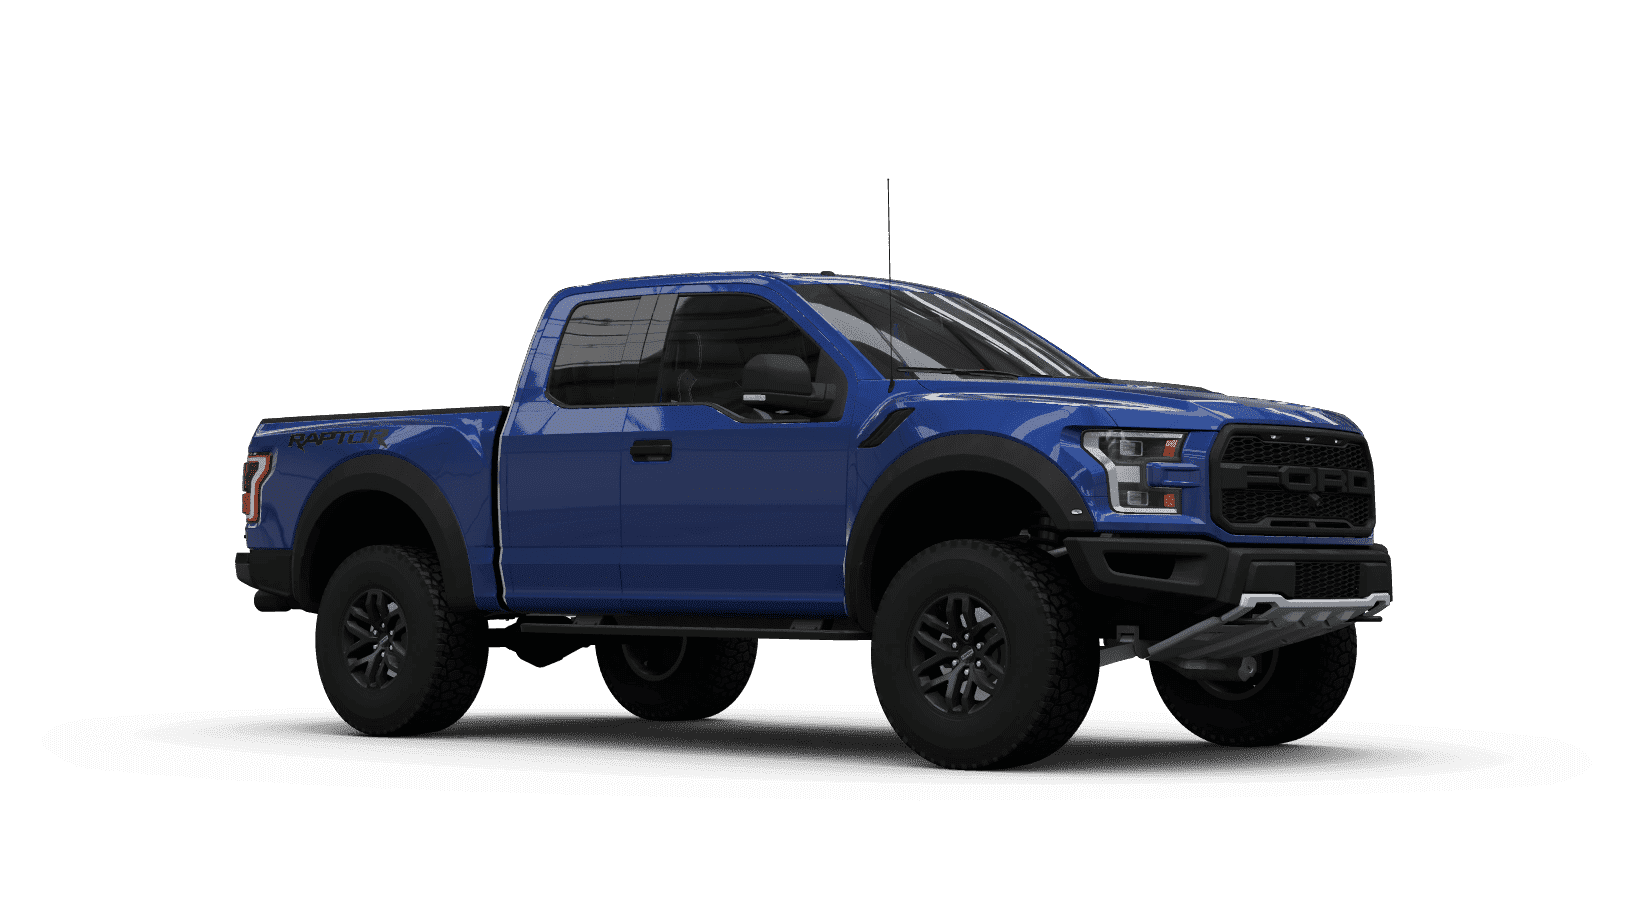 HOR XB1 Ford F 150 17 Forza Horizon 4 - Competitive Car List